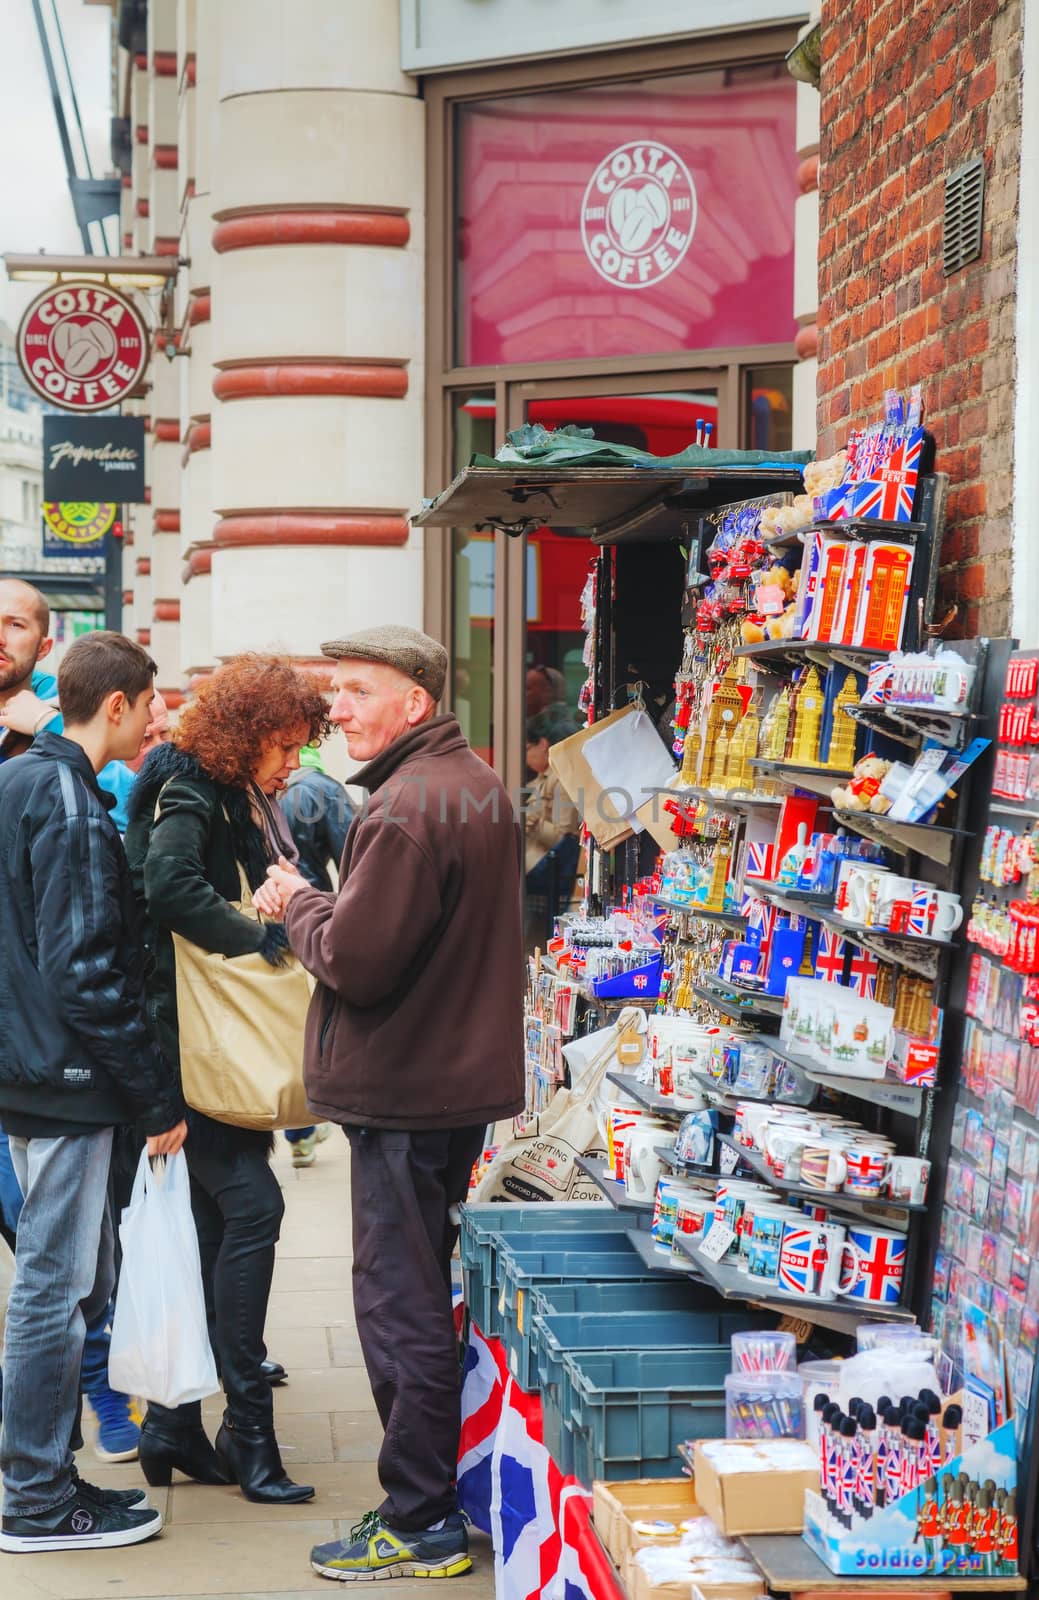 LONDON - APRIL 13: Street souvenir shop with tourists on April 13, 2015 in London, UK. London is a popular centre for tourism, one of its prime industries, employing the equivalent of 350,000 full-time workers.